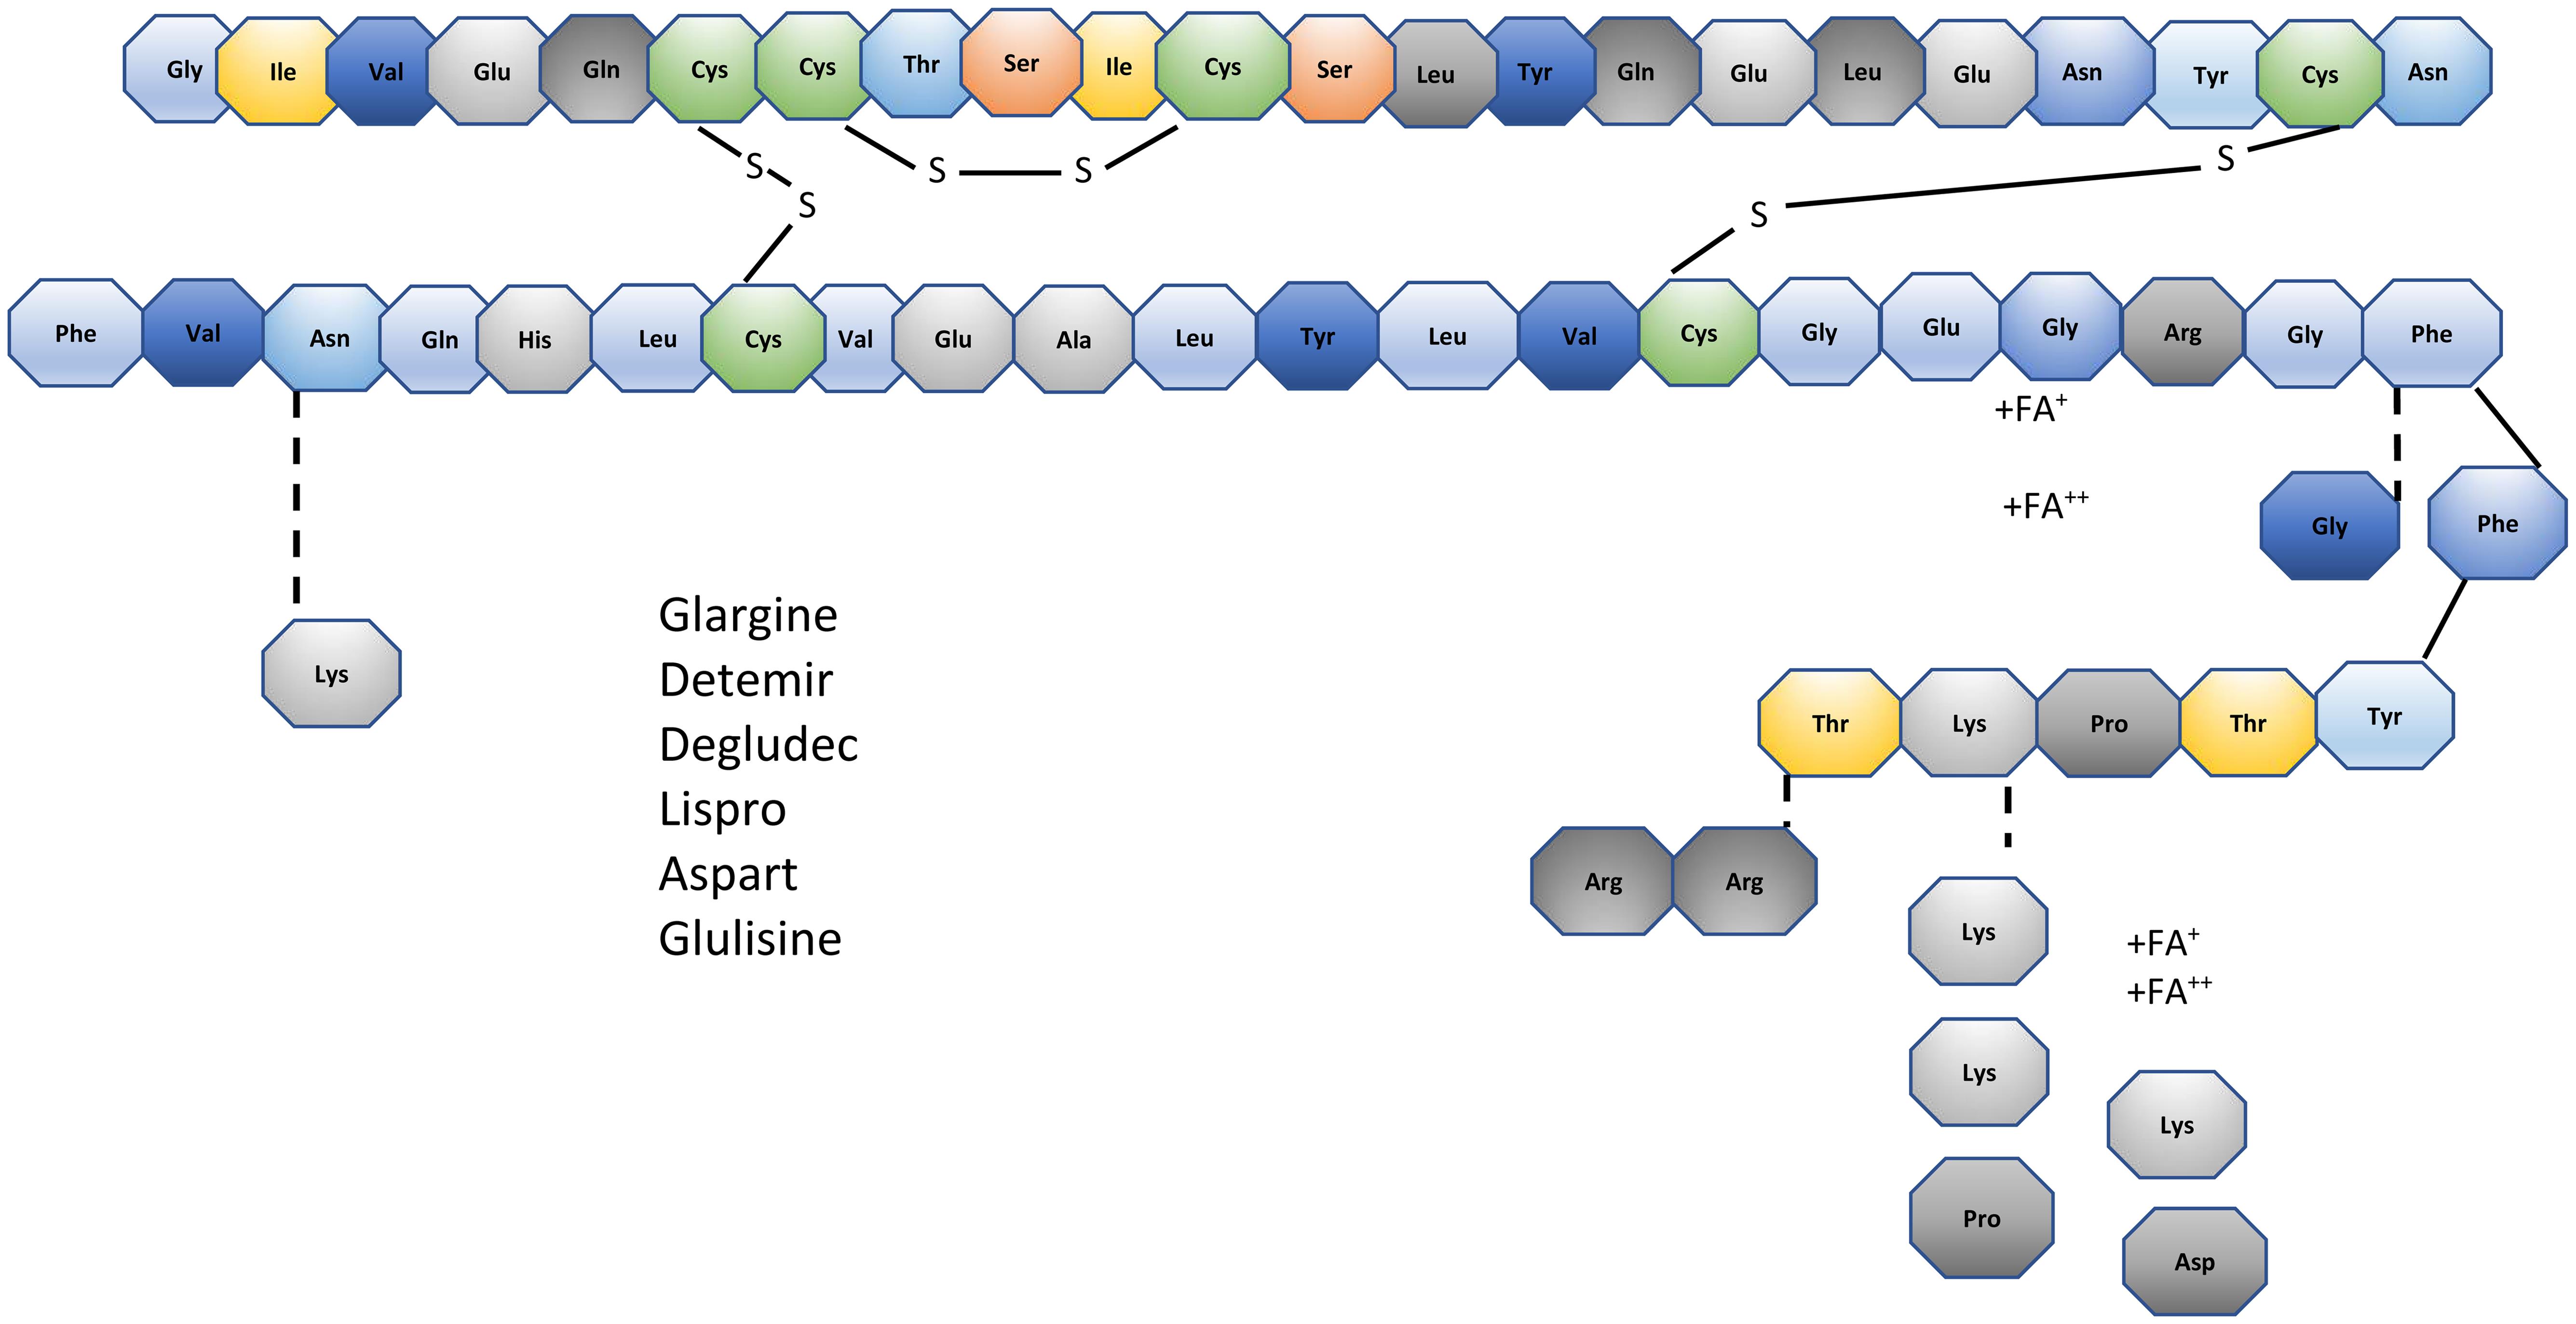 Schematic representation of human insulin polypeptide and insulin analog showing the amino acid sequences of the two chains (A-chain and B-chain) linked by two disulfide bridges and changes in amino acid sequences in selected insulin analogues.